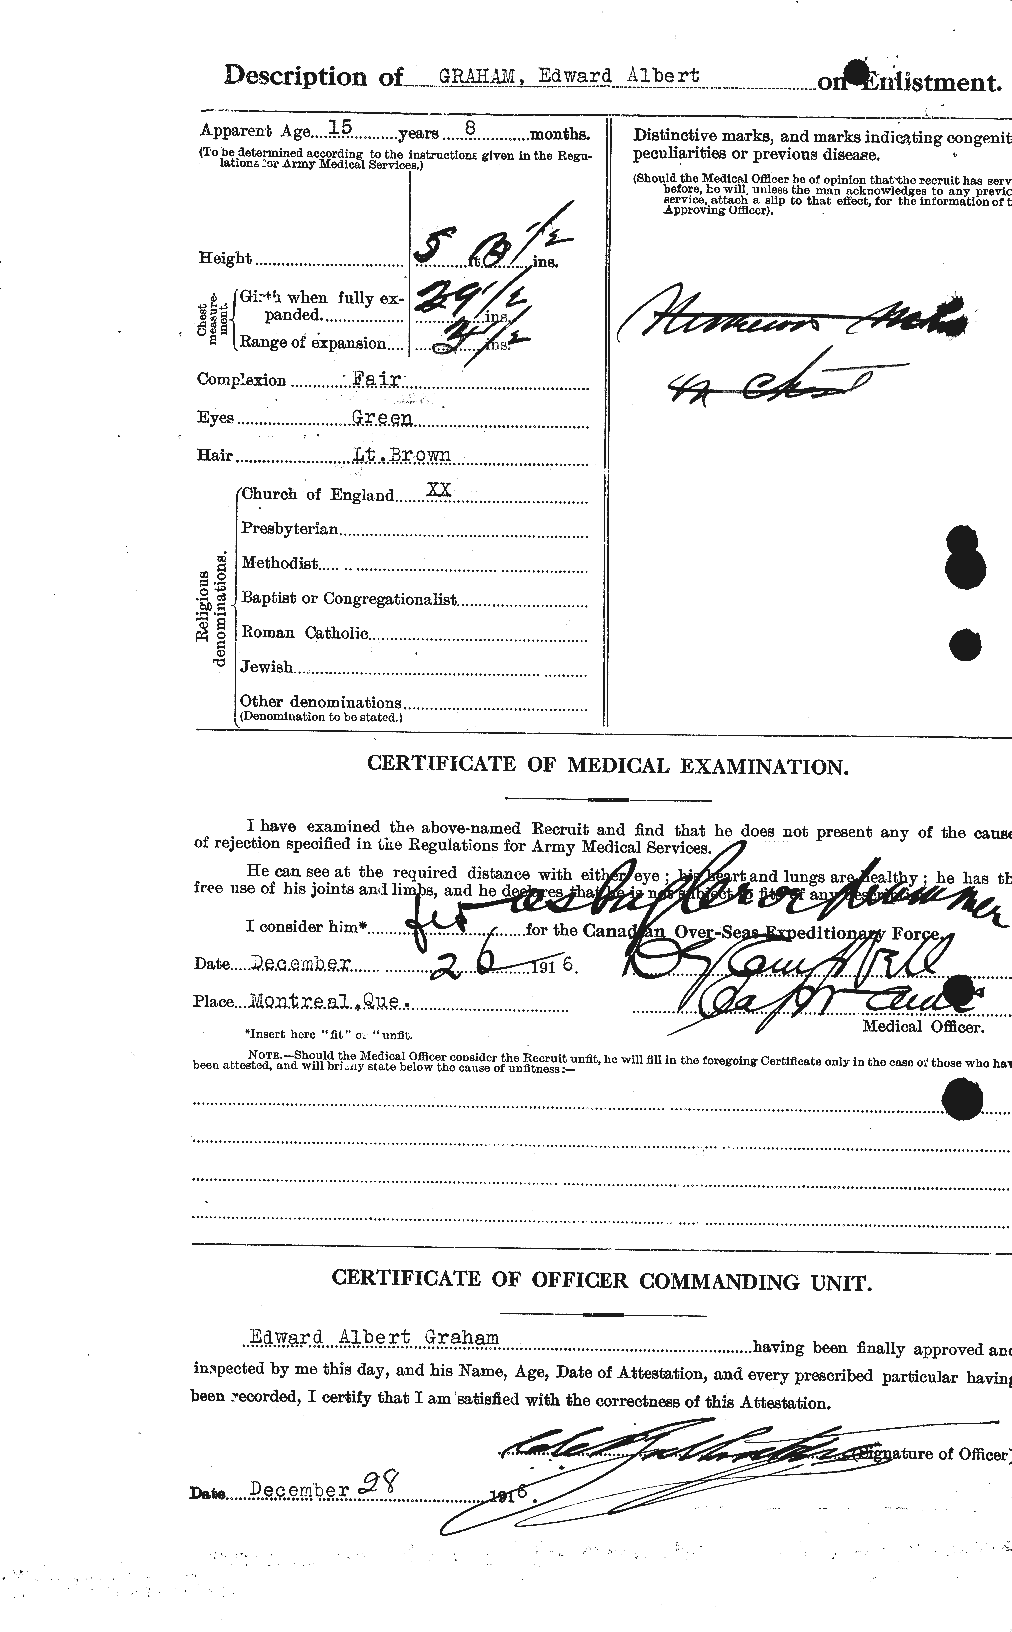 Personnel Records of the First World War - CEF 353865b